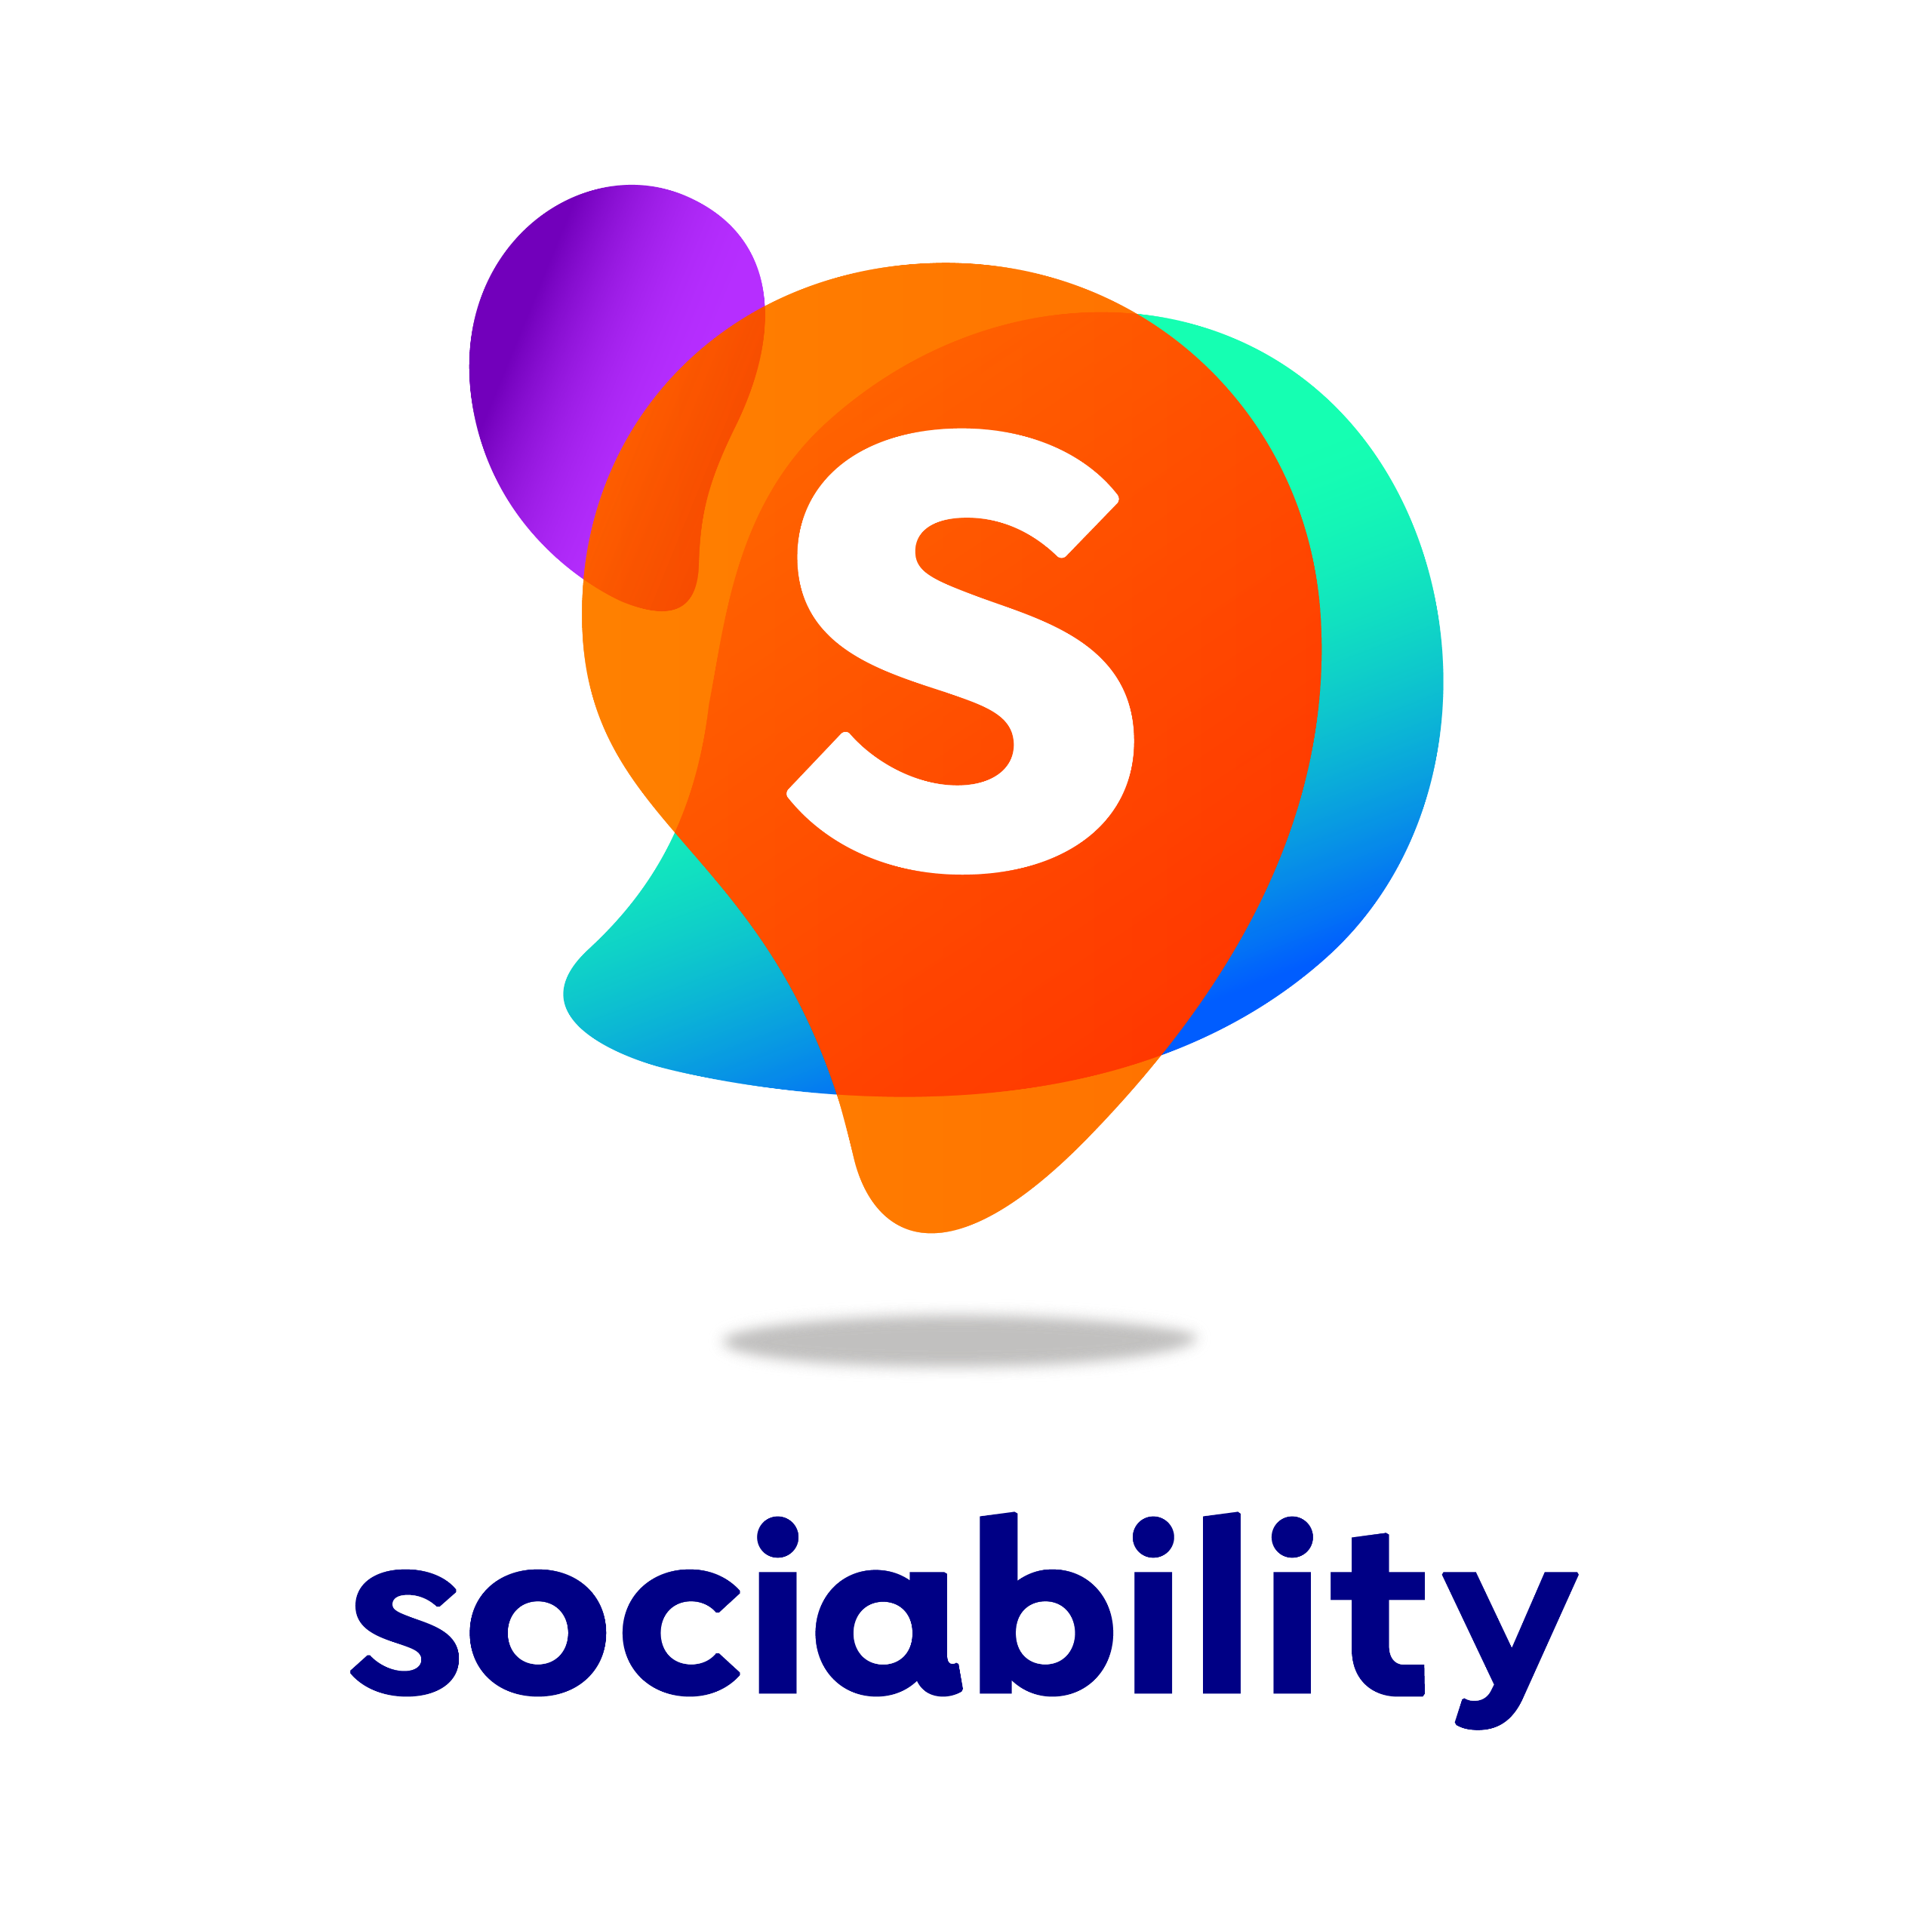 Sociability logo floating above the word 'Sociability'. Sociability logo is an orange pin shape with a white S in the middle, surrounded by a green/blue and purple pin.